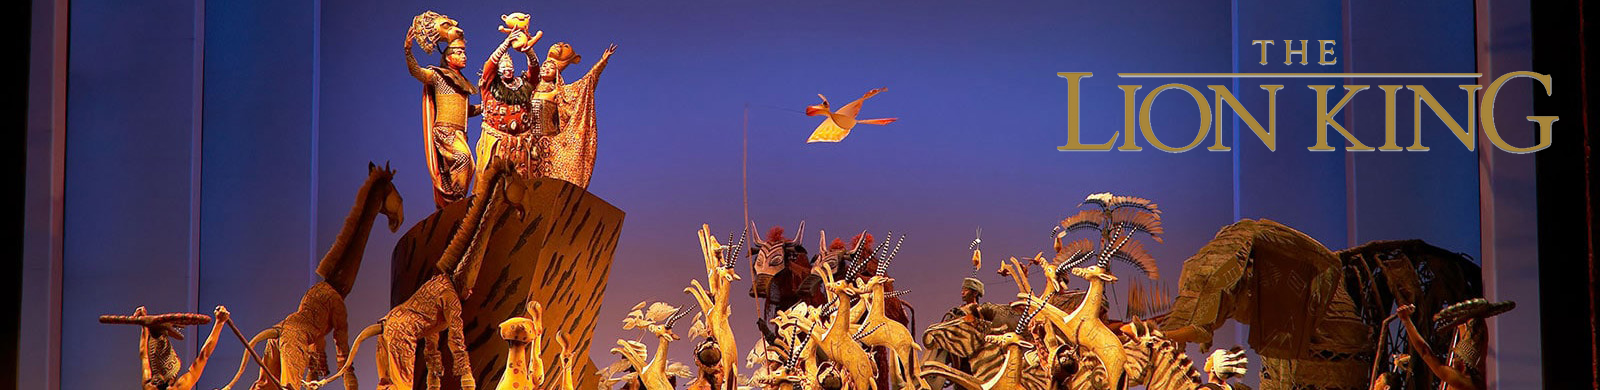 The Lion King Broadway Tickets